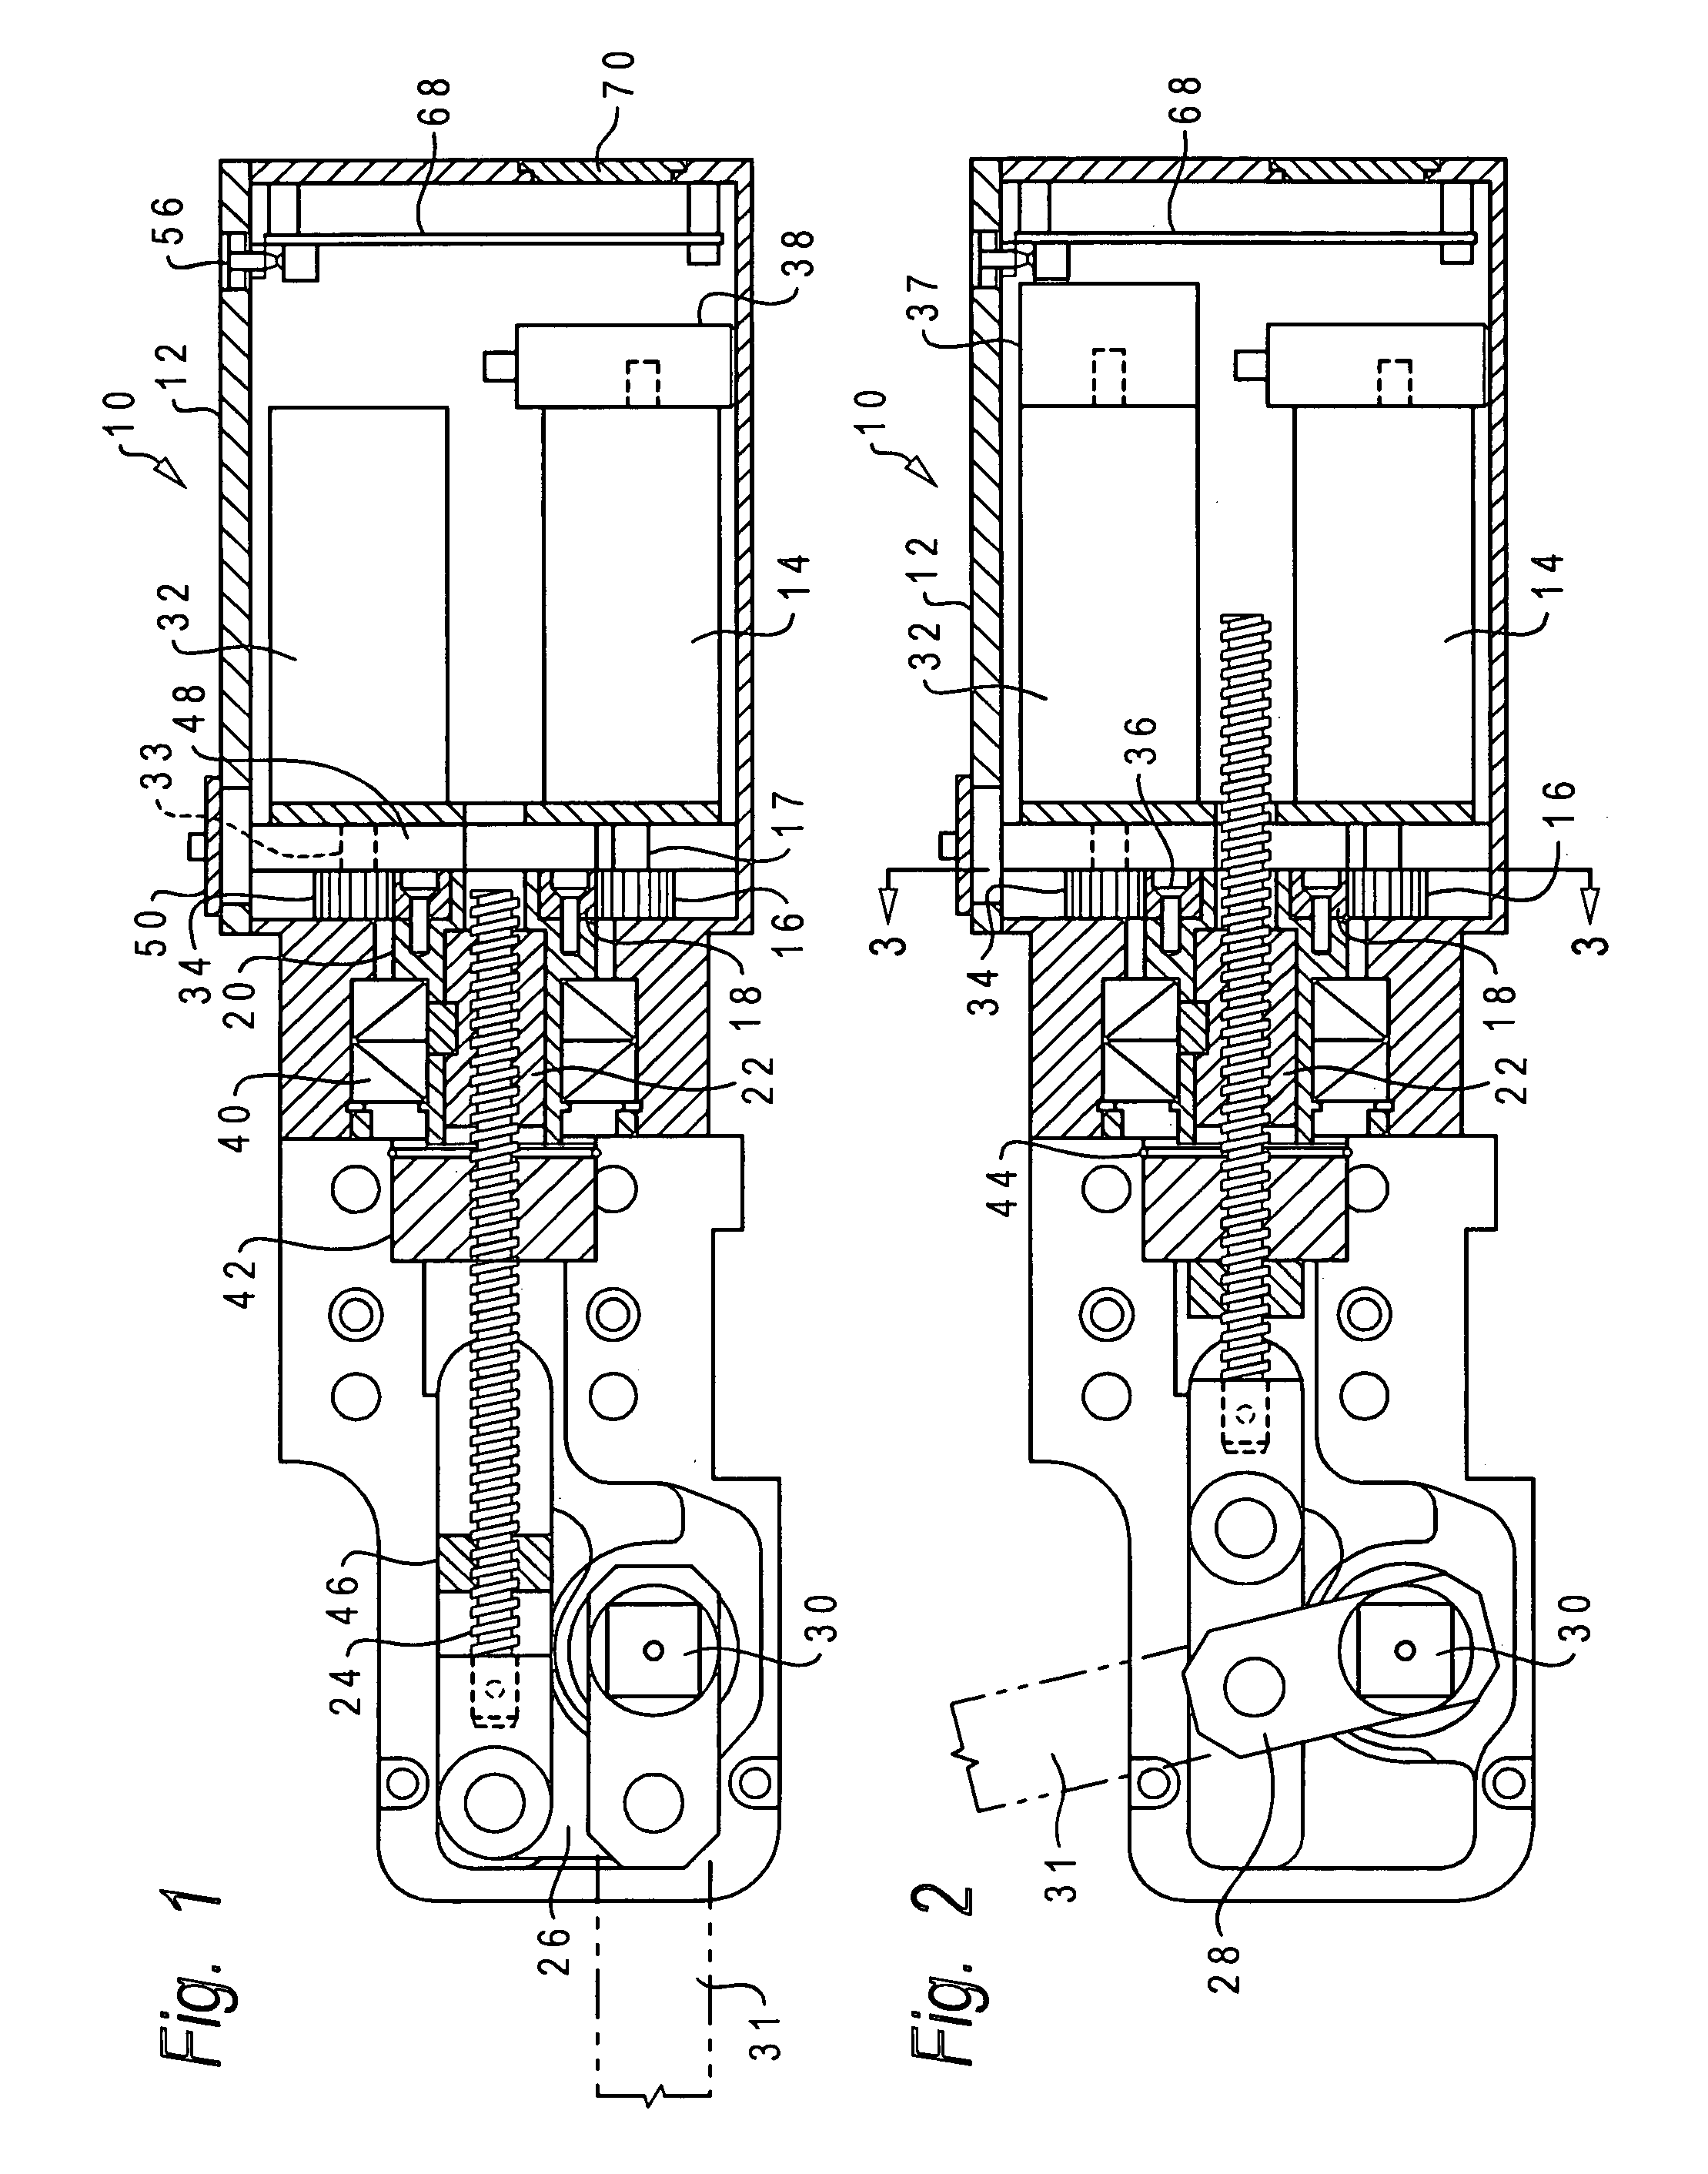 Motor pack for automated machinery